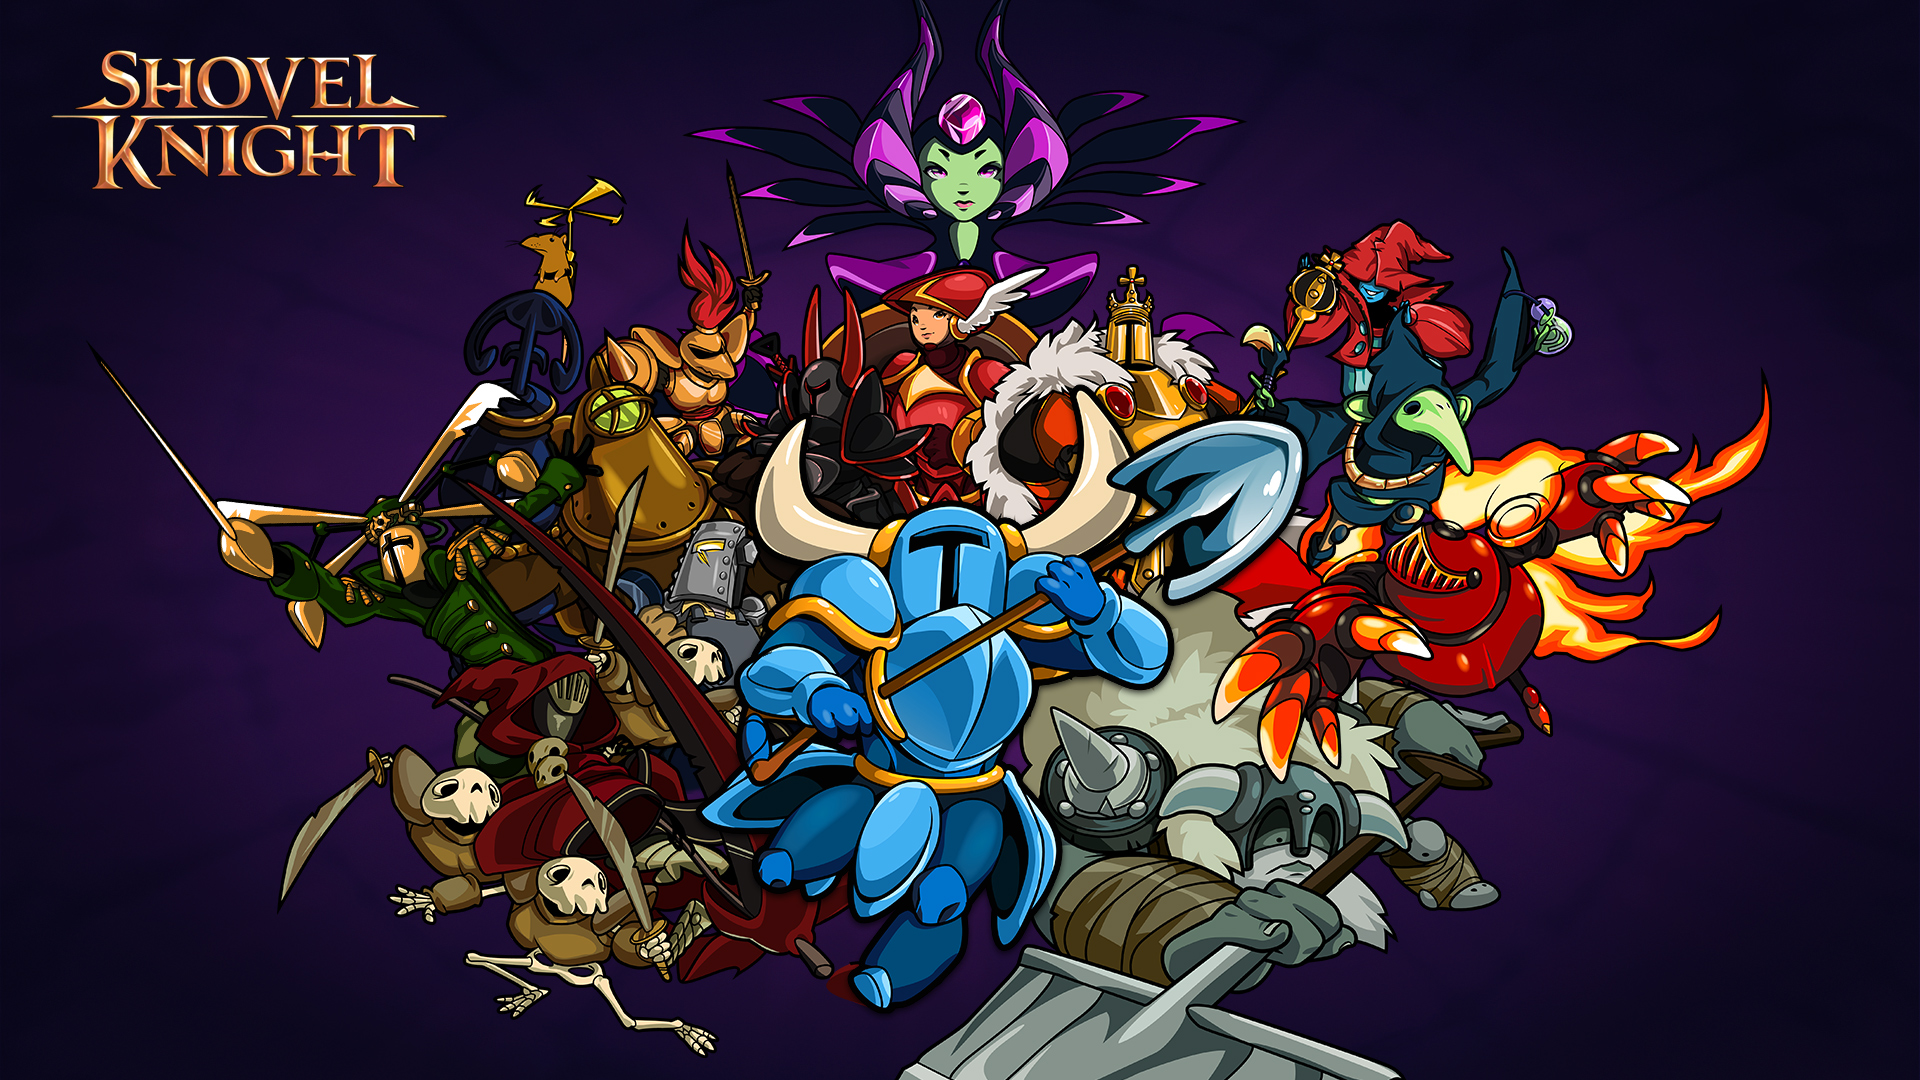 “Shovel Knight” for PlayStation Coming April 21 - Prepare Your Shovel for a Fight with Kratos